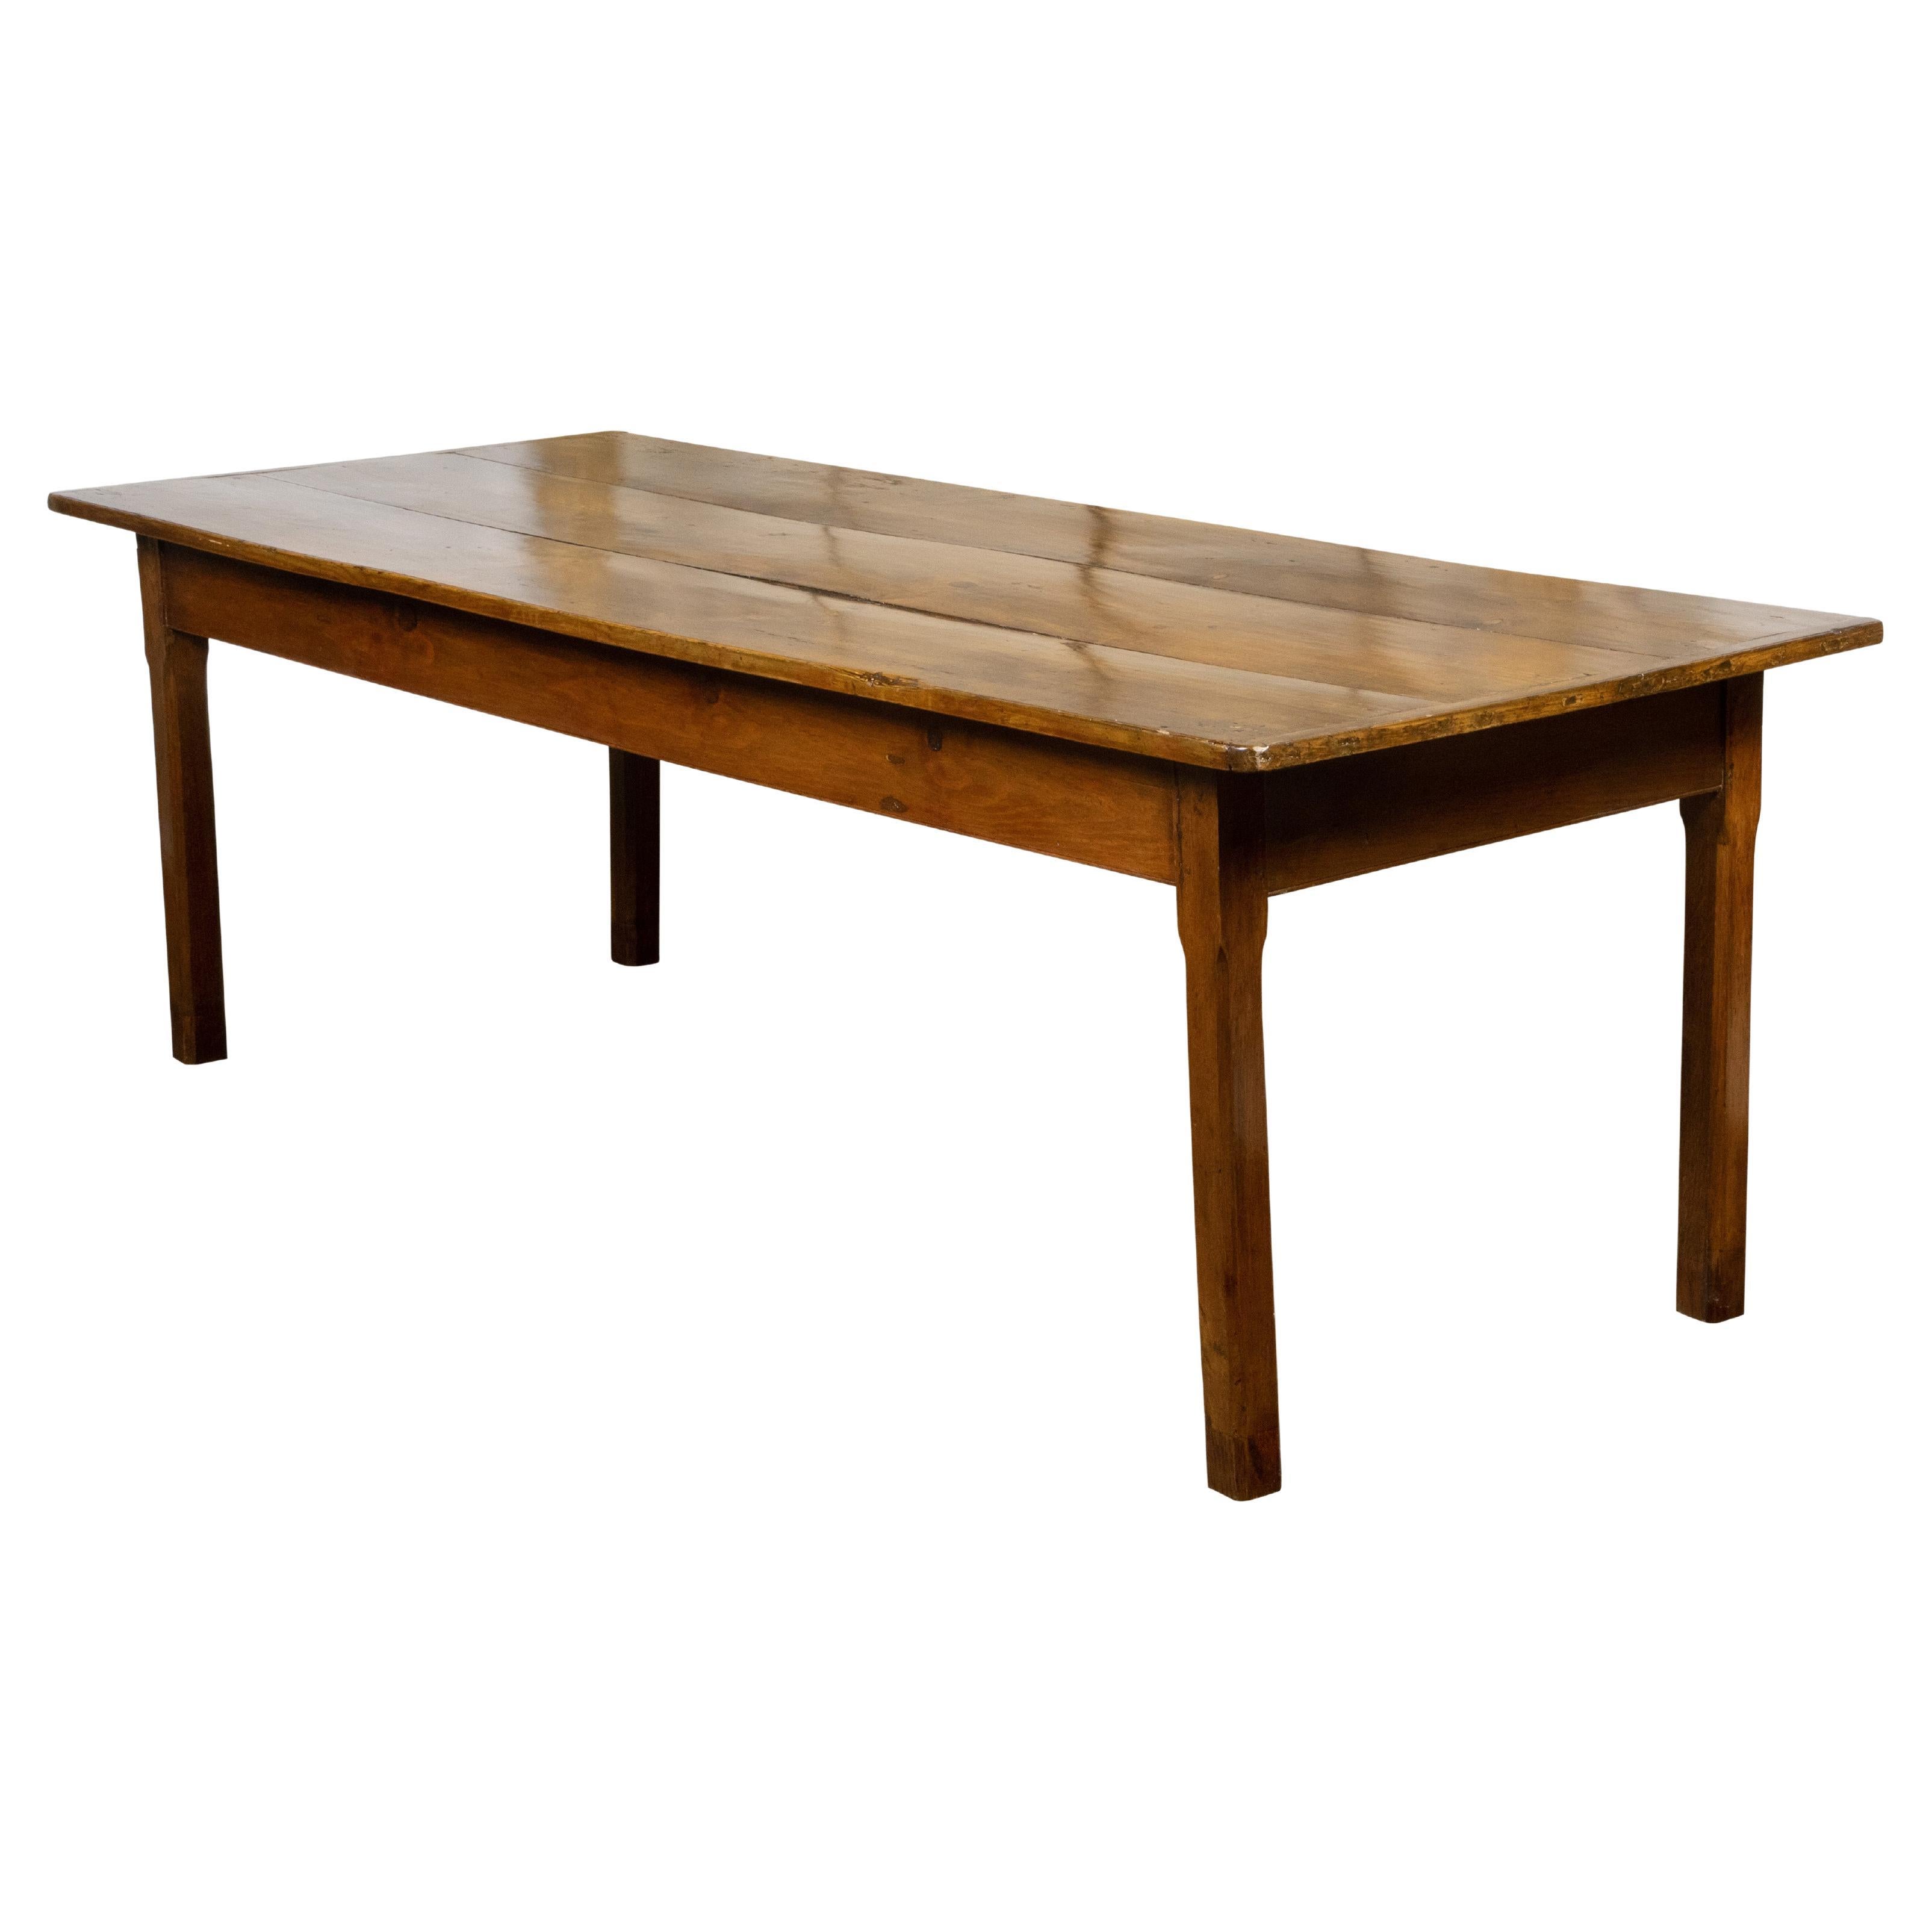 Country French Rustic Pine Farm Table with Straight Legs from the 19th Century